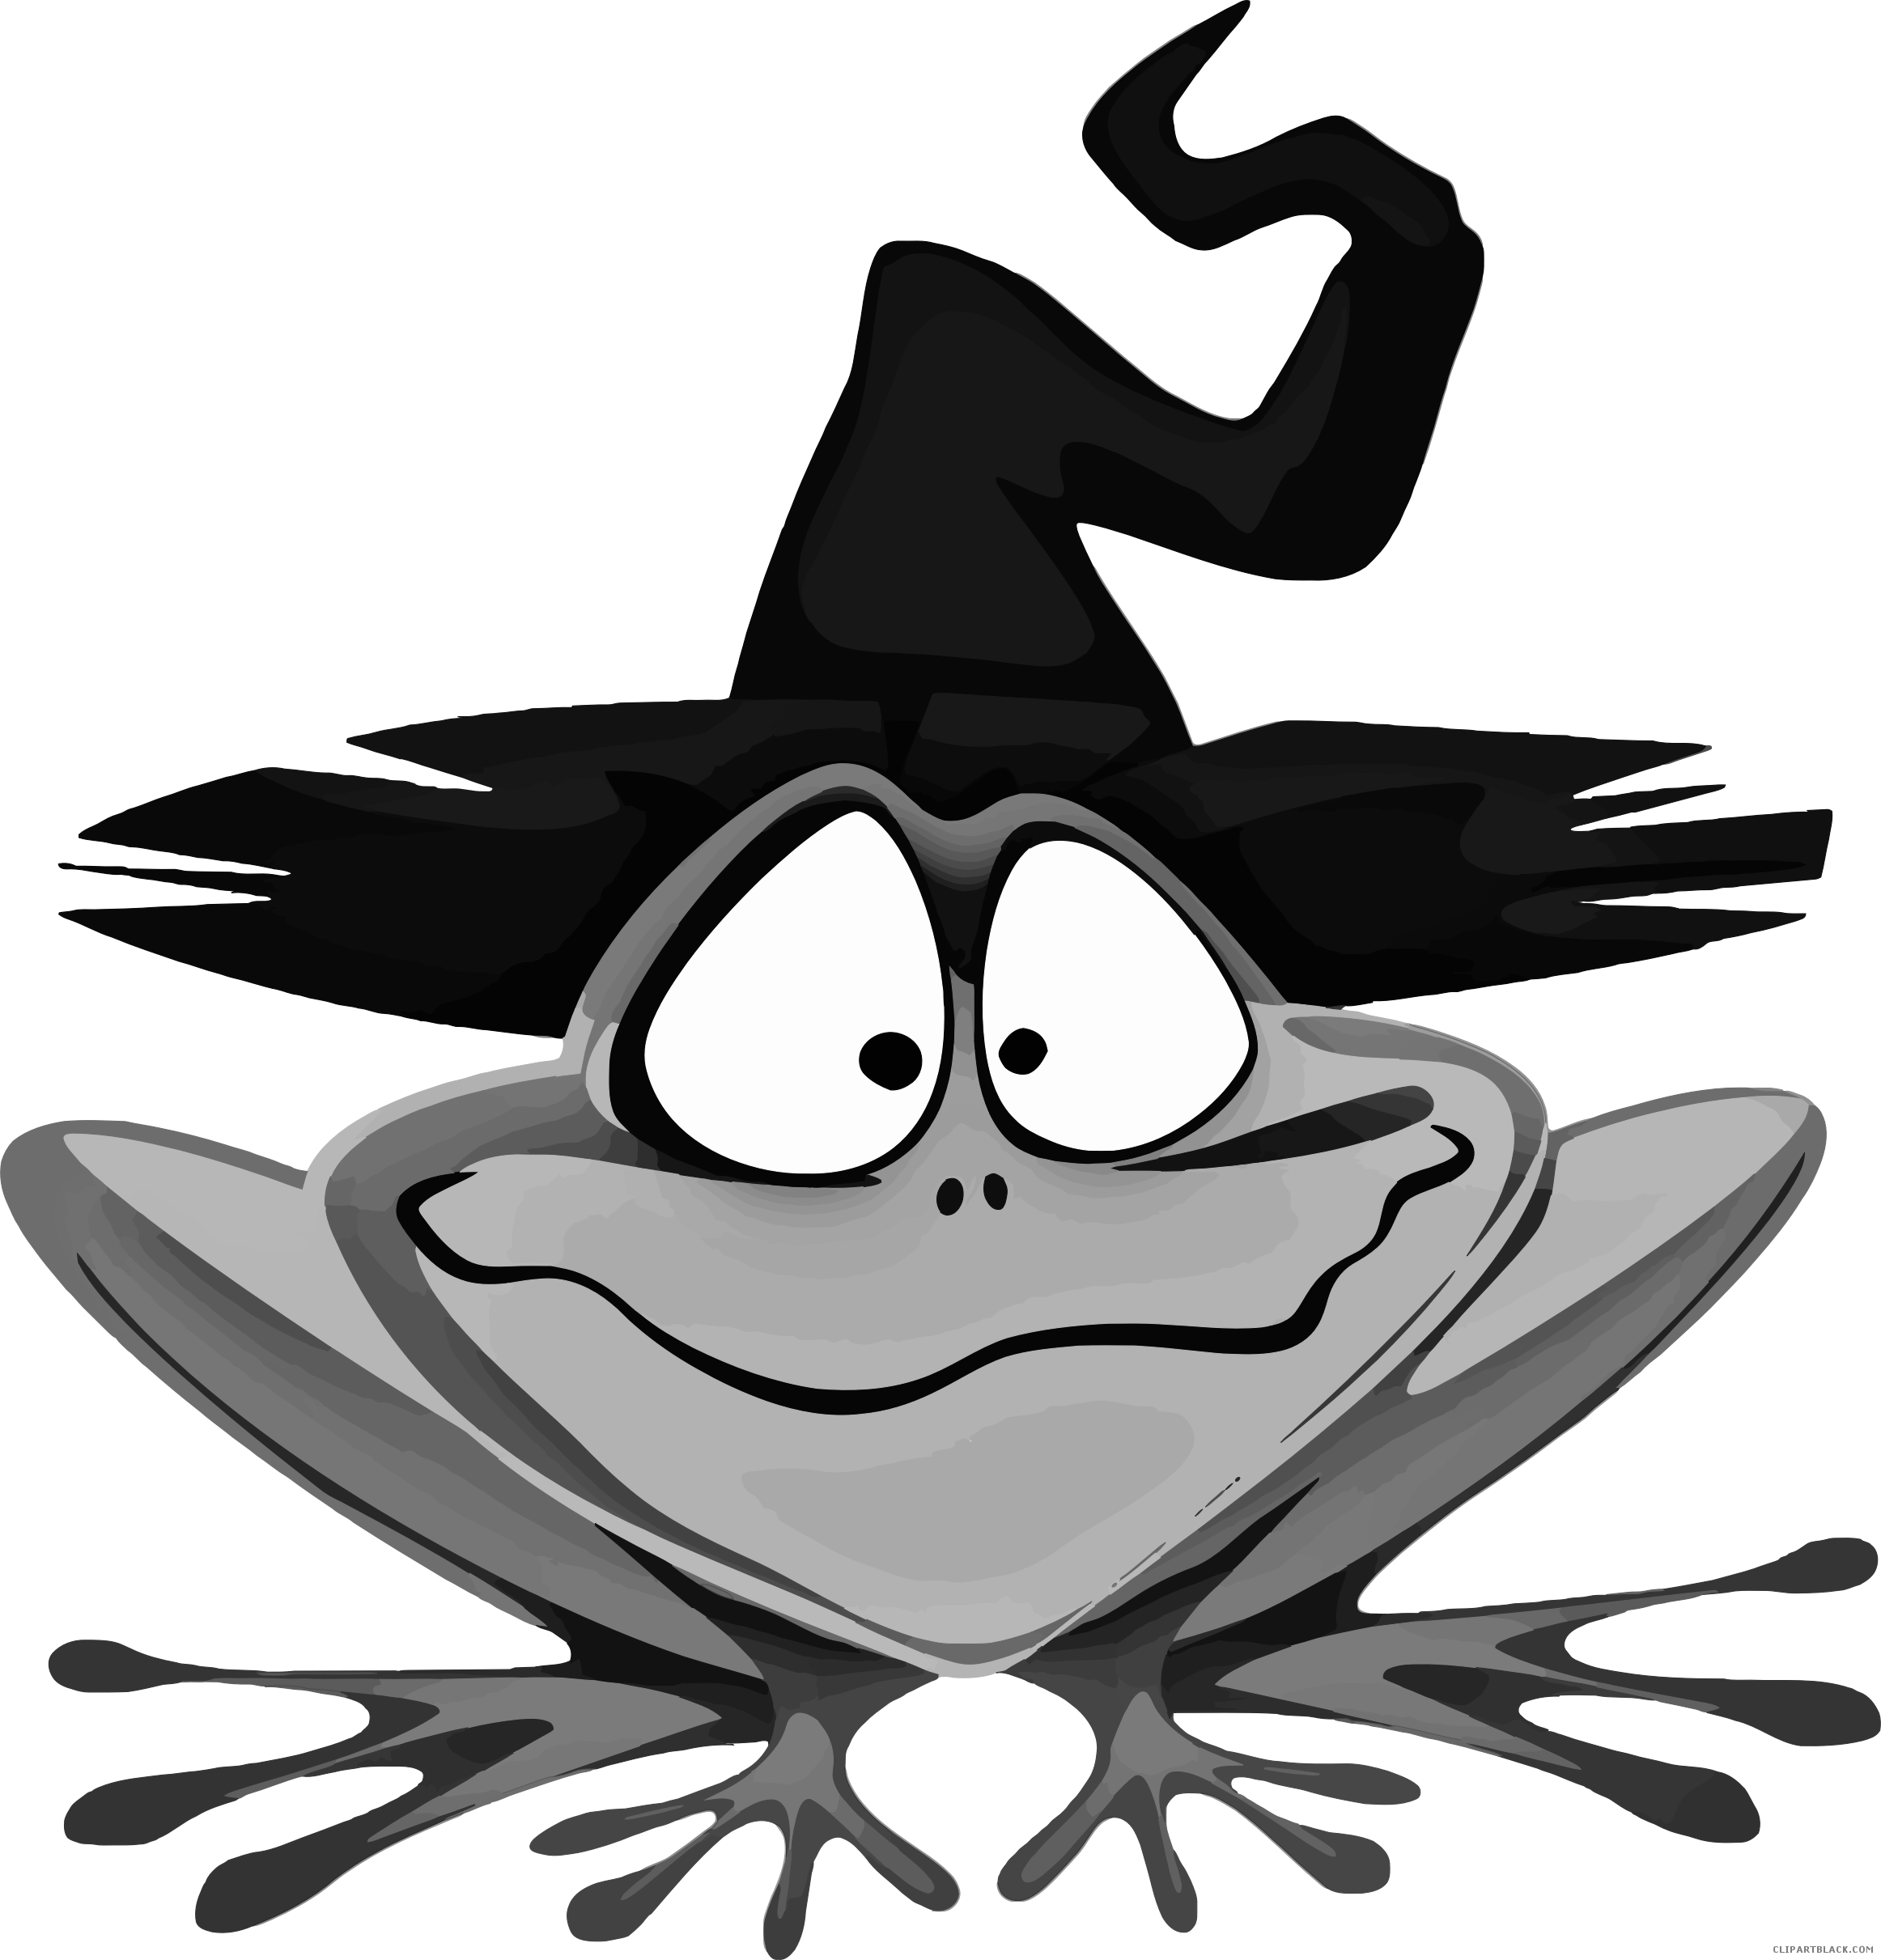 frog clipart animal